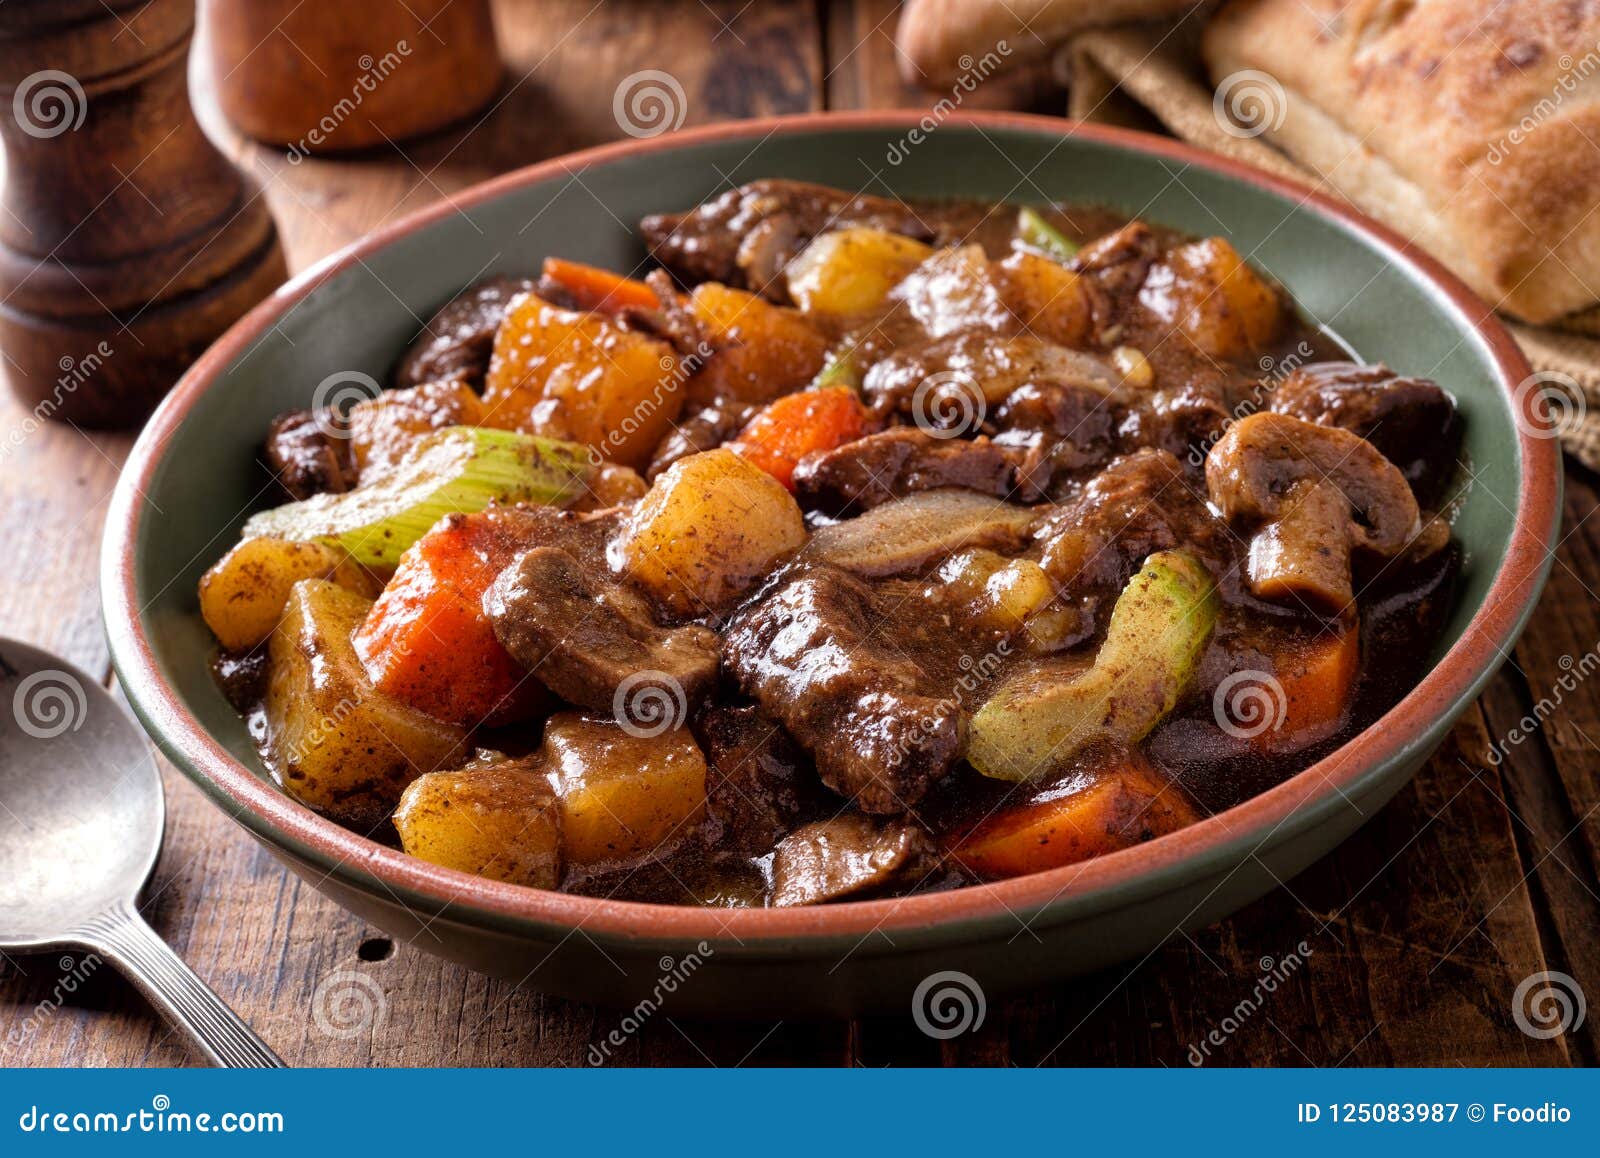 hearty homemade beef stew